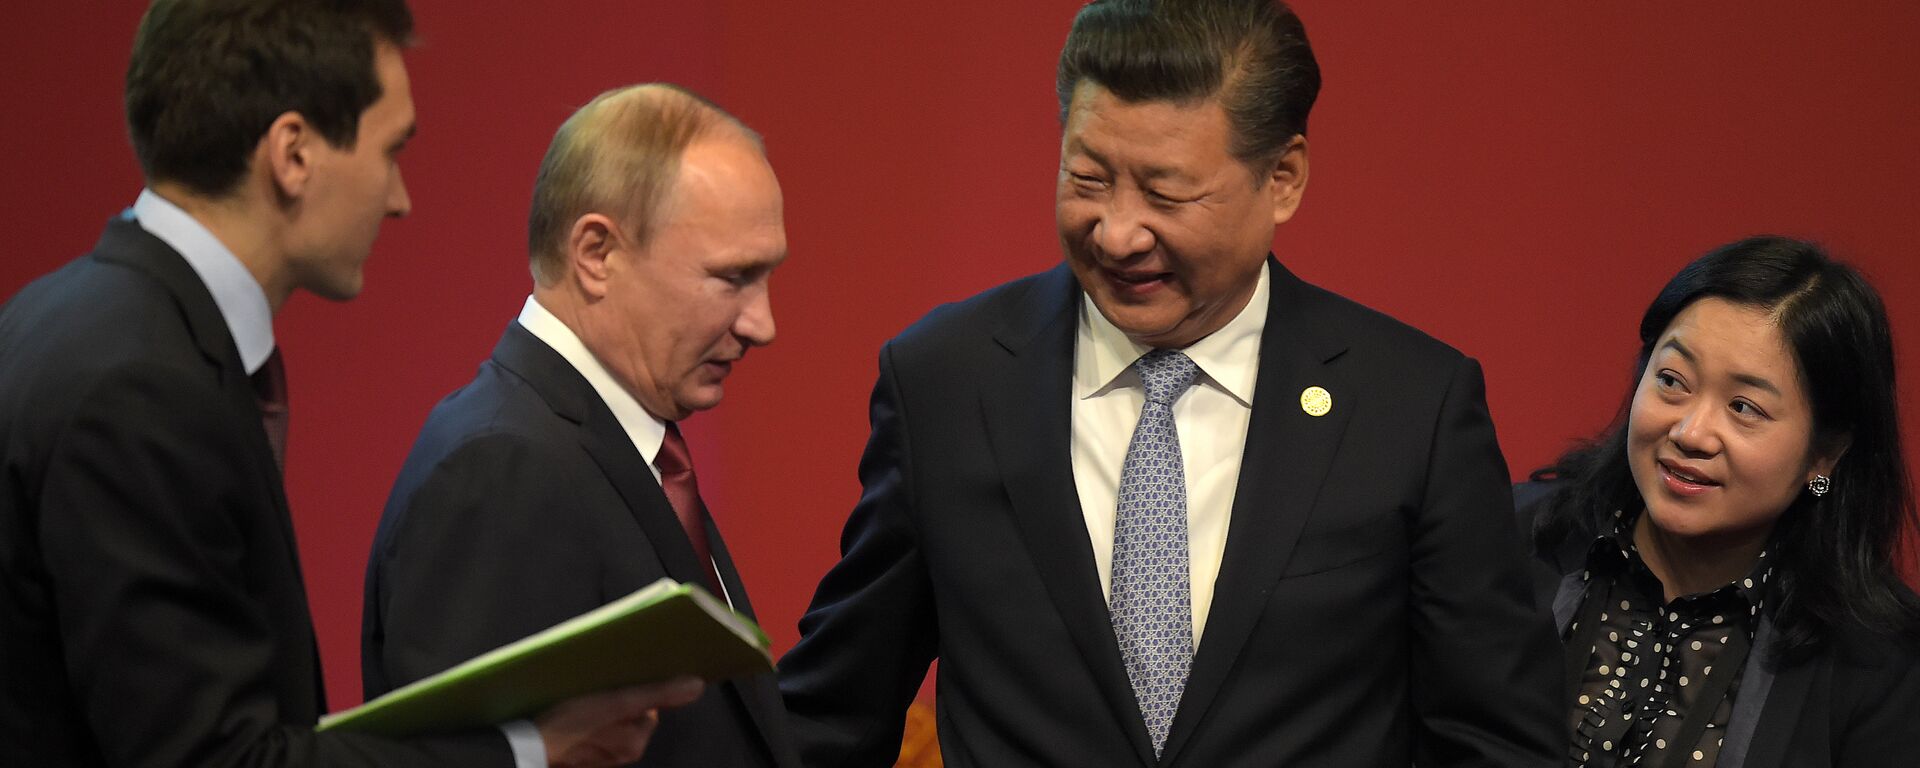 Russia's President Vladimir Putin (2nd L) and China's President Xi Jinping (2nd R) chat after shaking hands at the start of the ABAC and APEC Leaders' Dialogue at the Asia-Pacific Economic Cooperation Summit in Lima on November 19, 2016. - Sputnik International, 1920, 24.10.2022